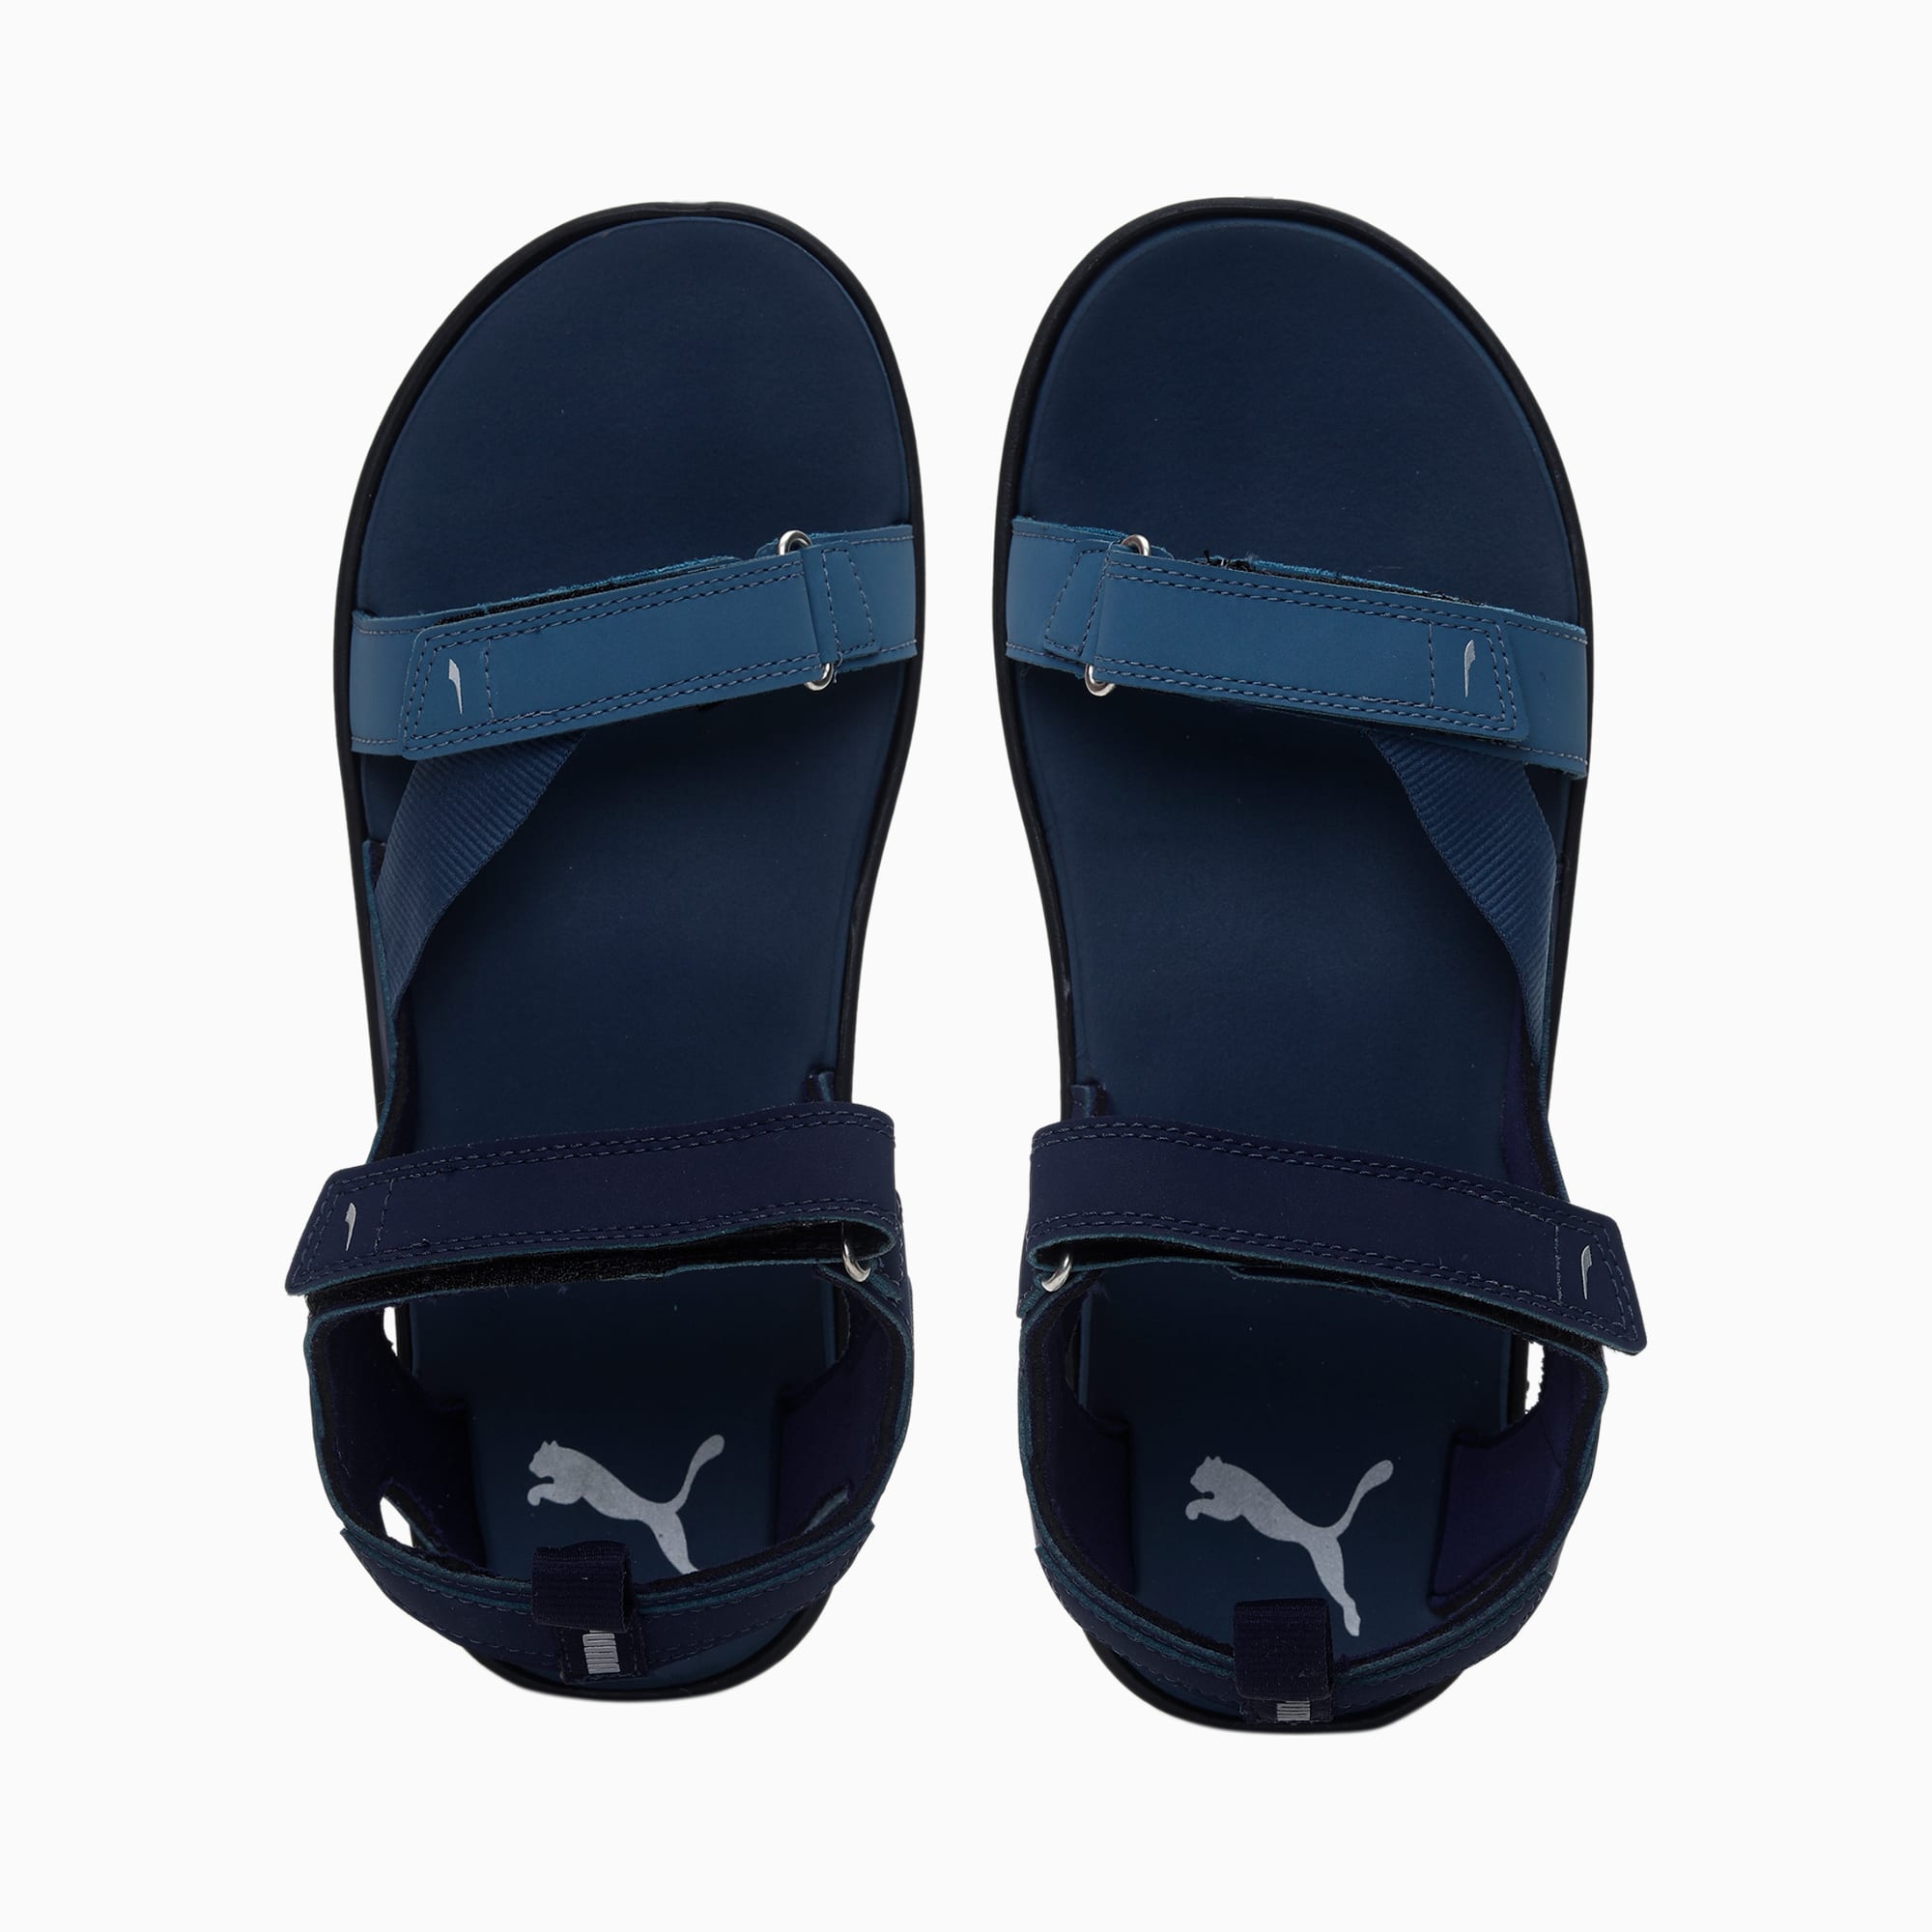 Buy Best Sports Sandals For Online With Upto Off On PUMA